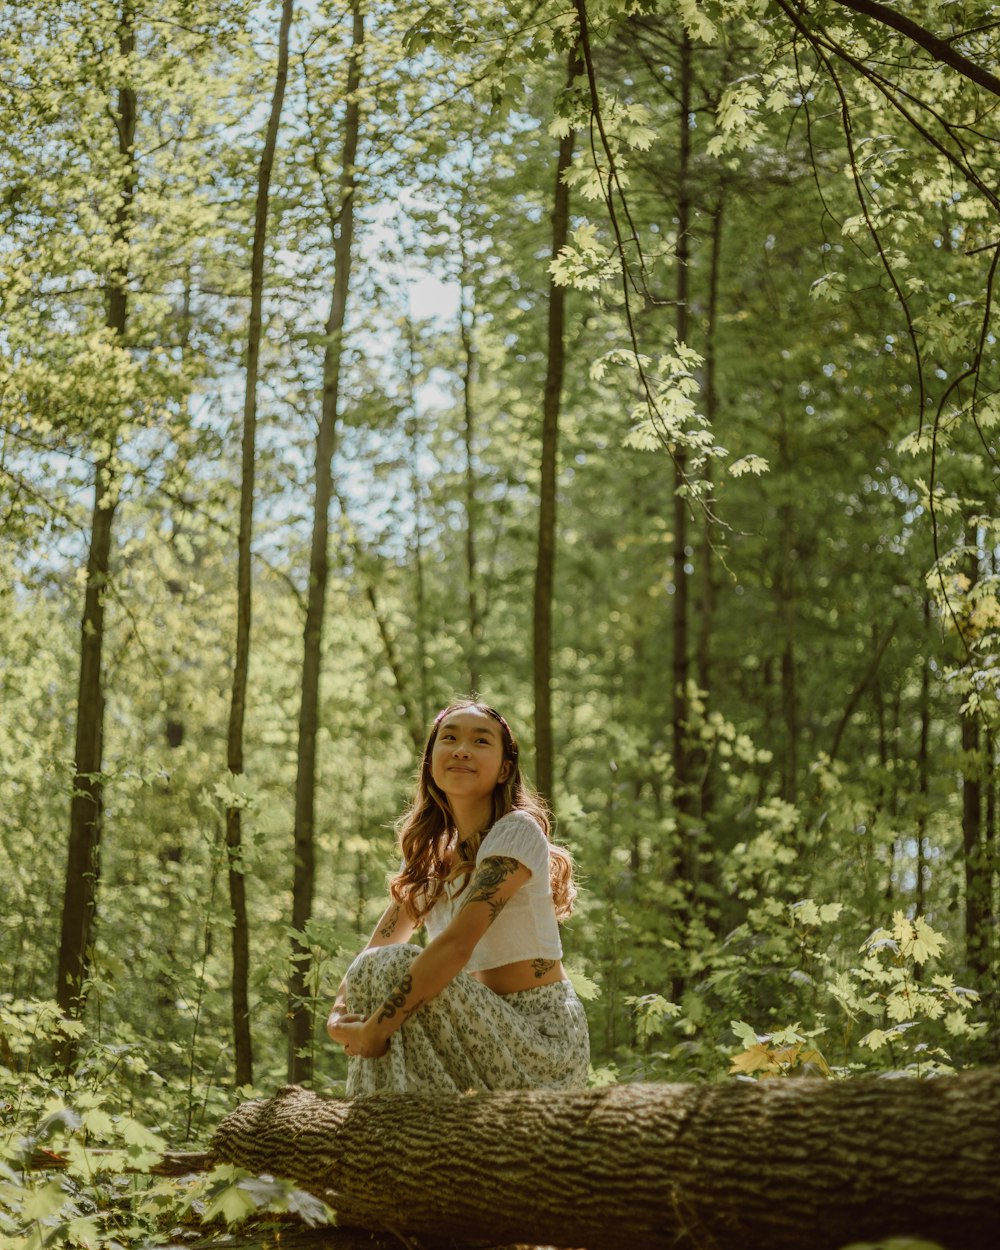 woman in white and blue floral dress sitting on brown tree log during daytime